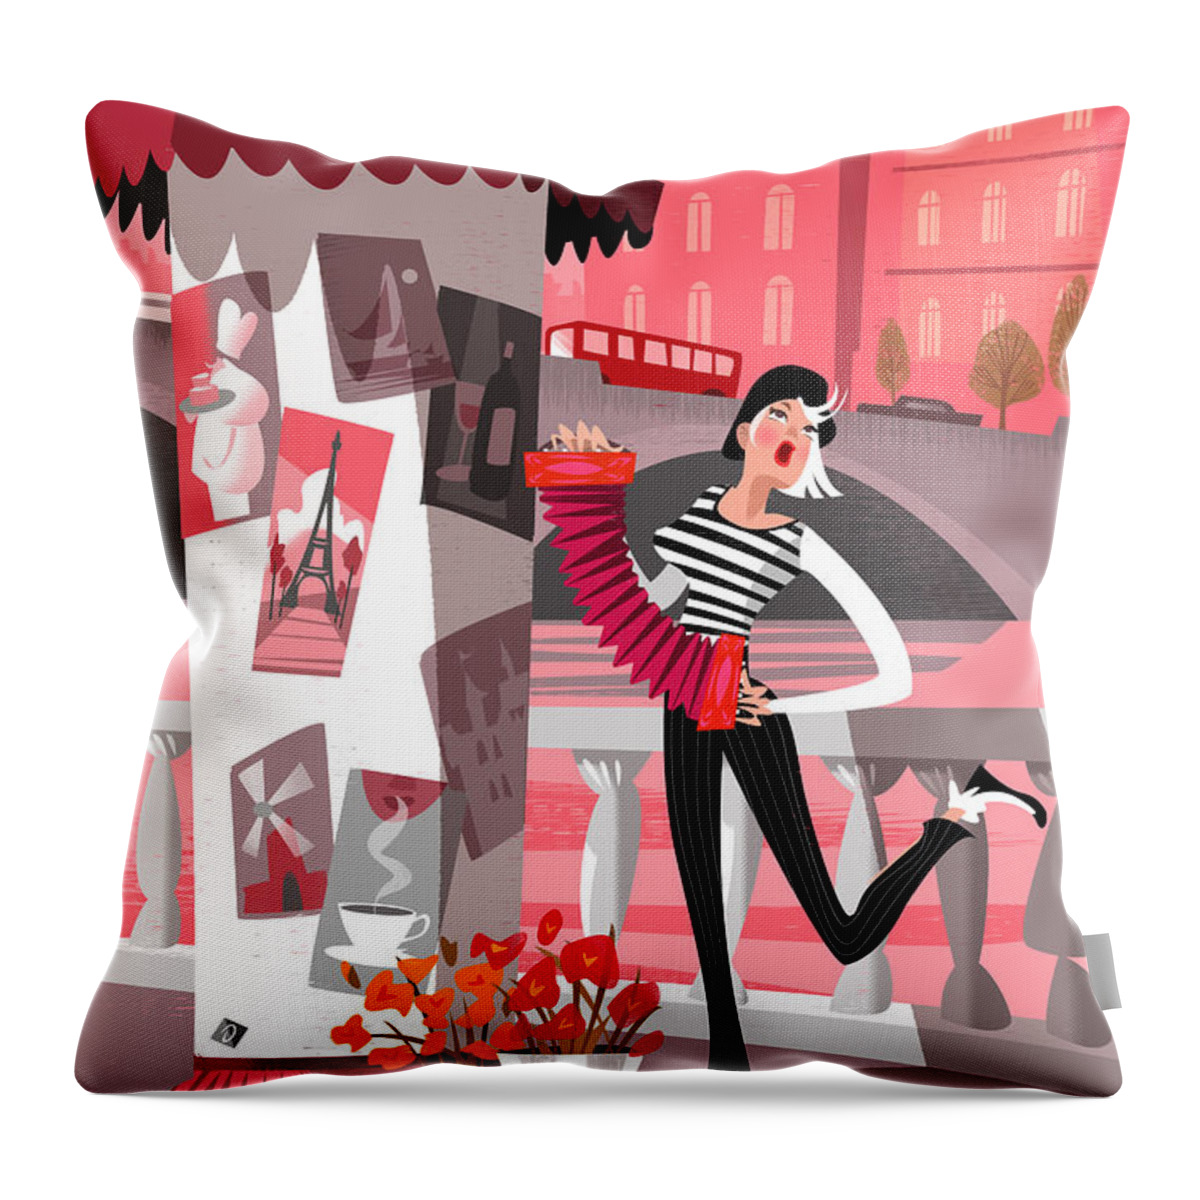 Concertina Throw Pillow featuring the digital art The Red Concertina by Alan Bodner